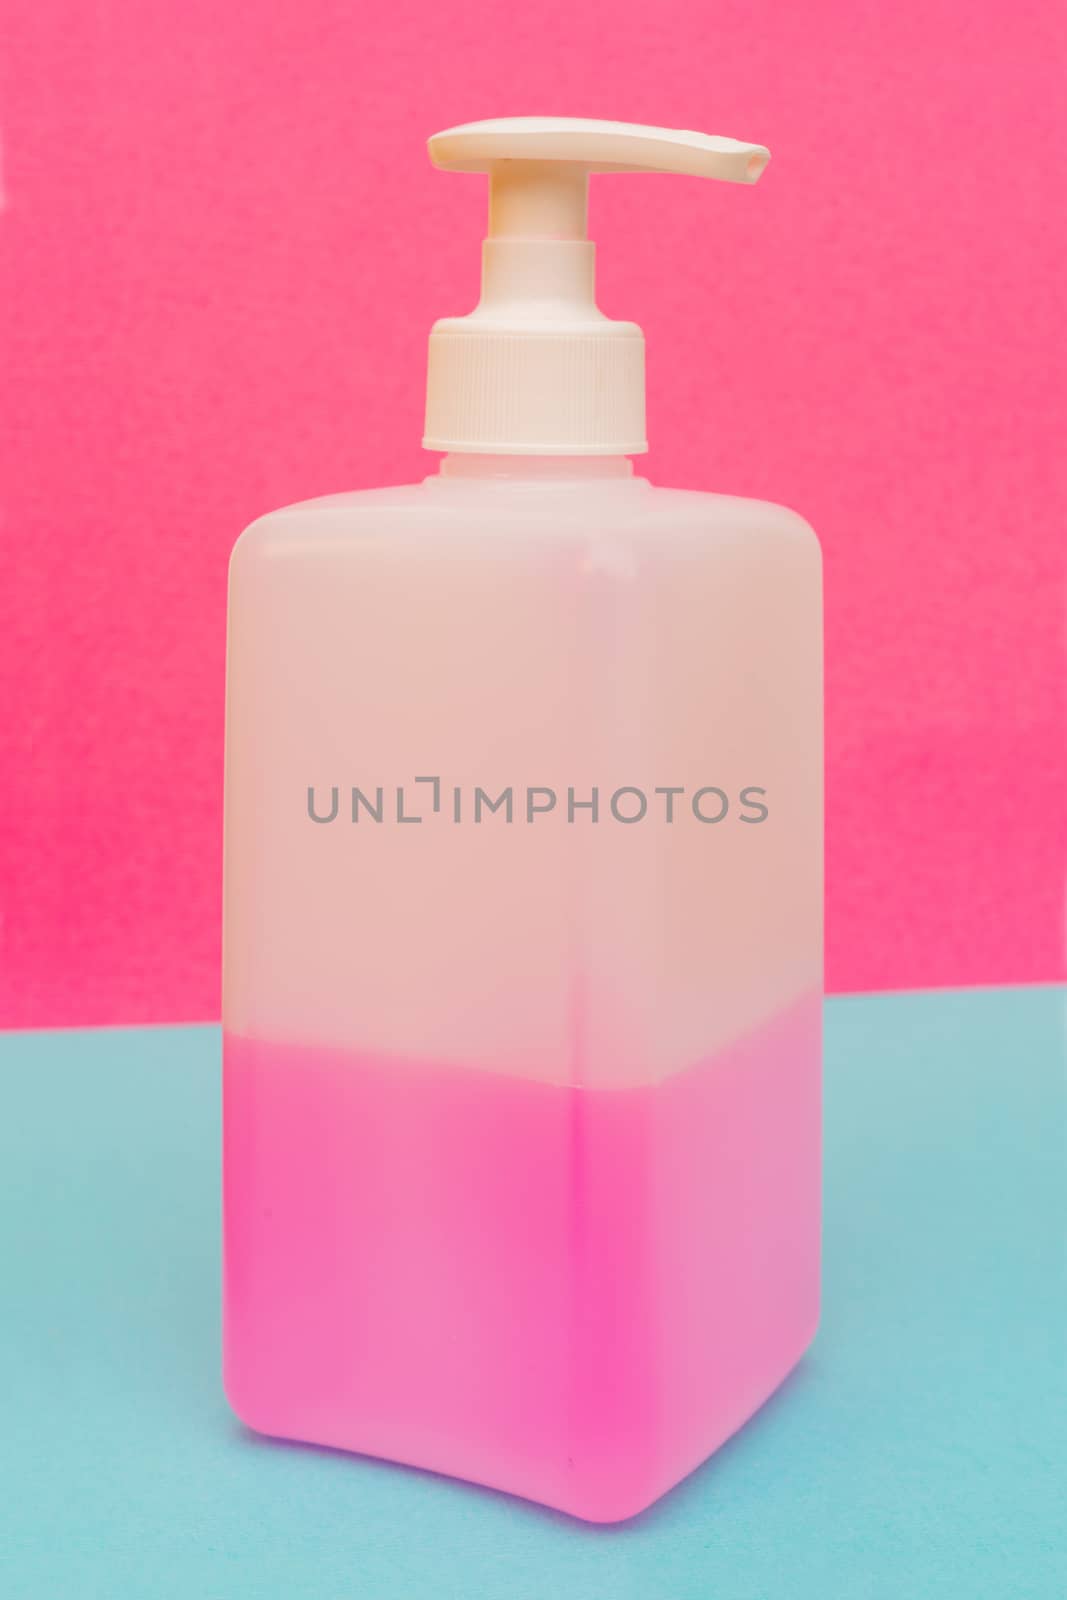 Antibacterial disinfectant soap. Liquid pink soap in white bottle.